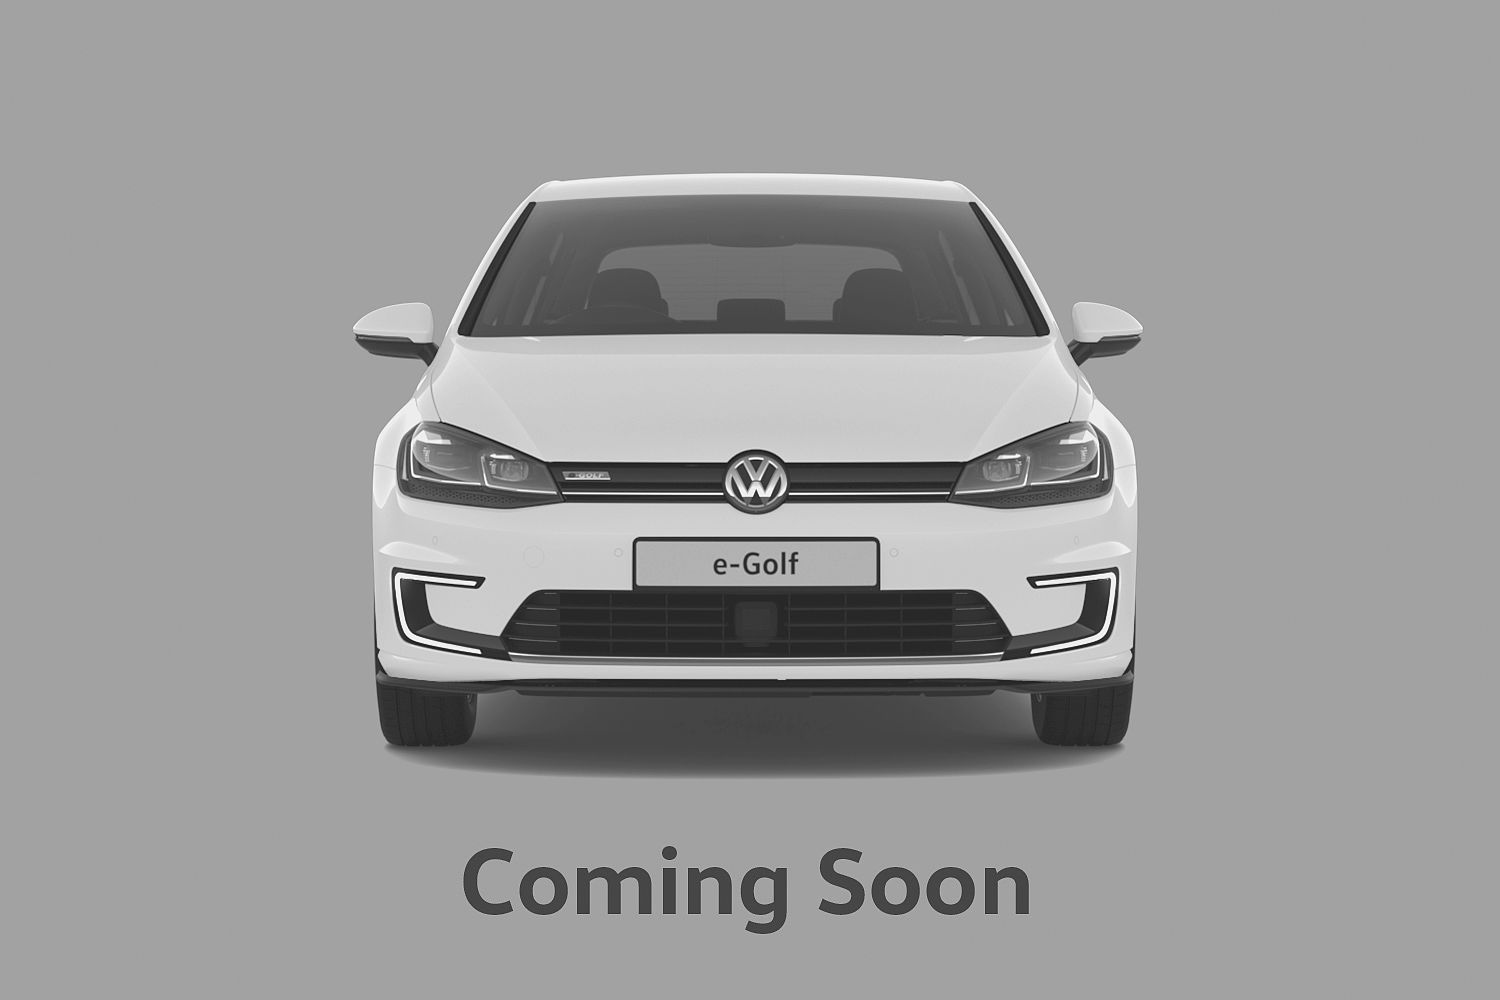 Volkswagen Golf e-Golf 136PS 1-speed automatic